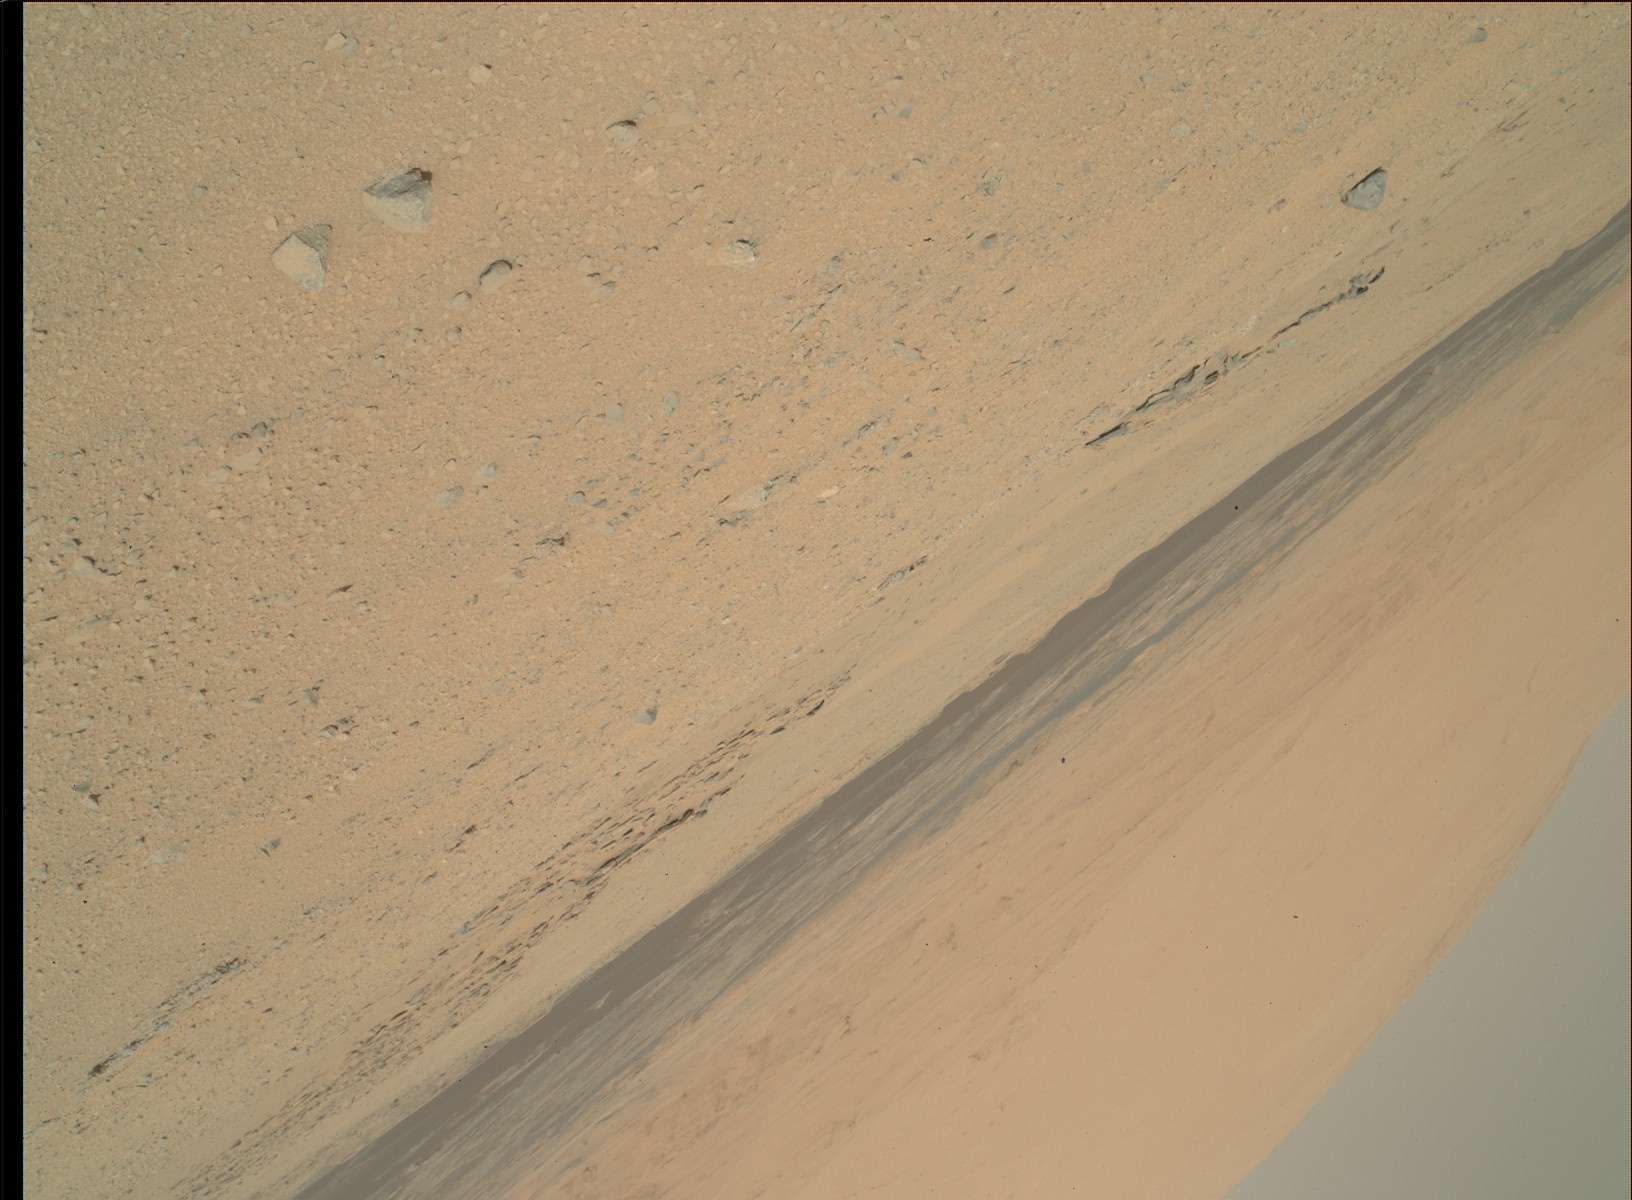 Nasa's Mars rover Curiosity acquired this image using its Mars Hand Lens Imager (MAHLI) on Sol 656